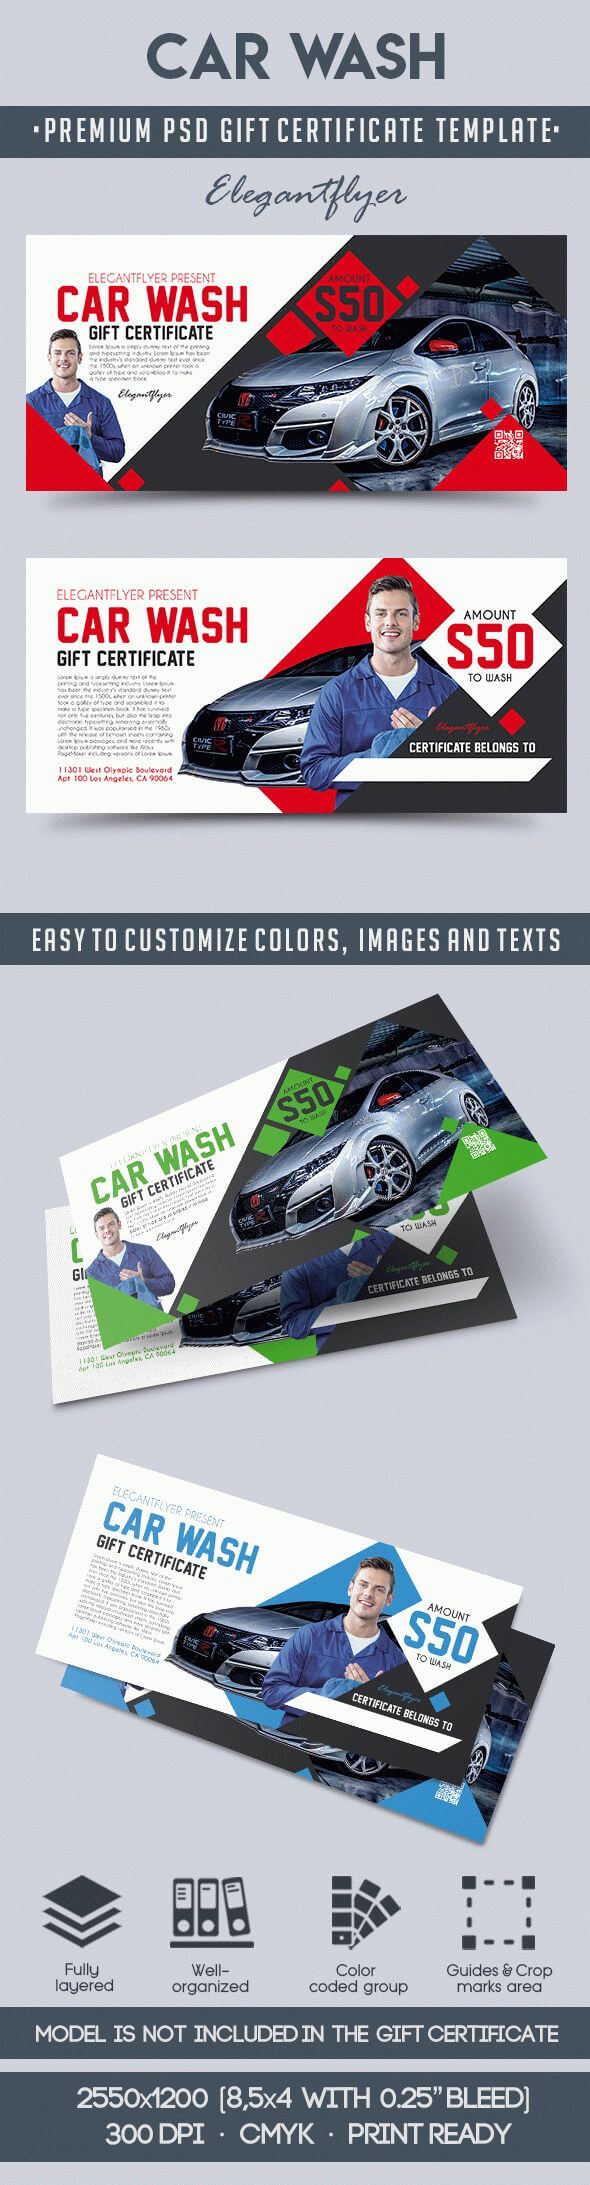 car-wash-premium-gift-certificate-psd-template-within-automotive-gift